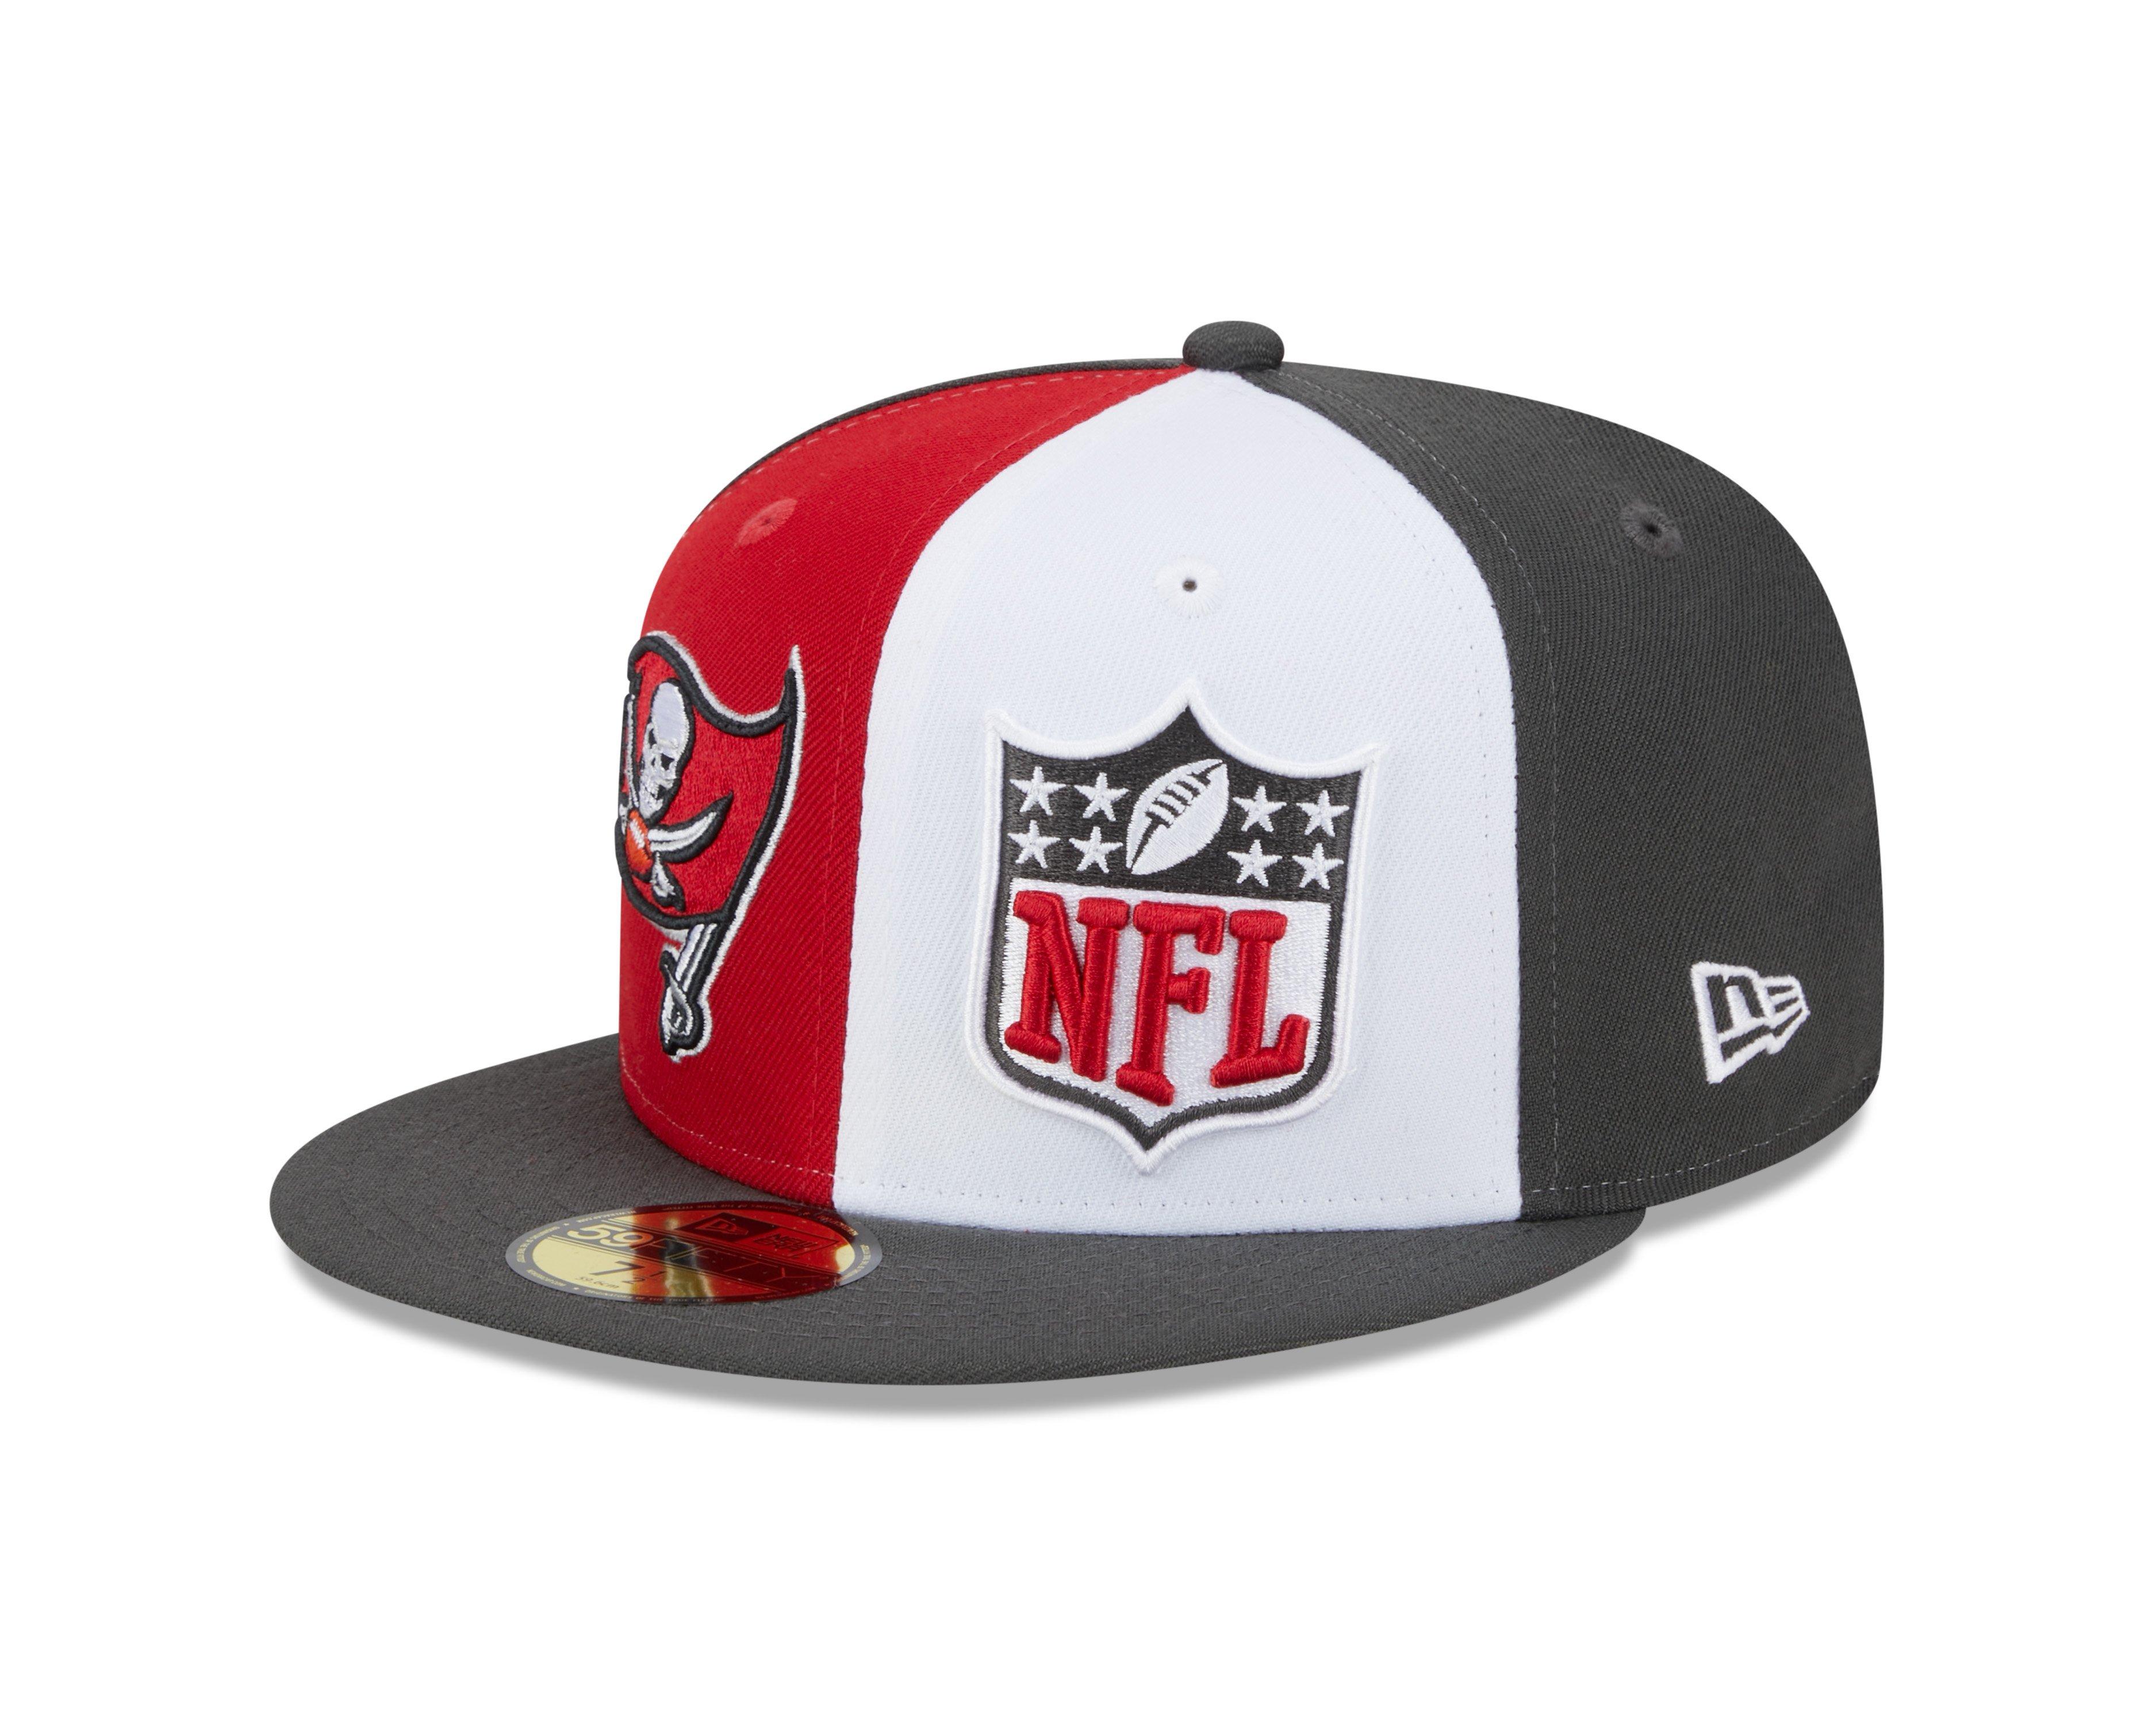 buccaneers fitted hat